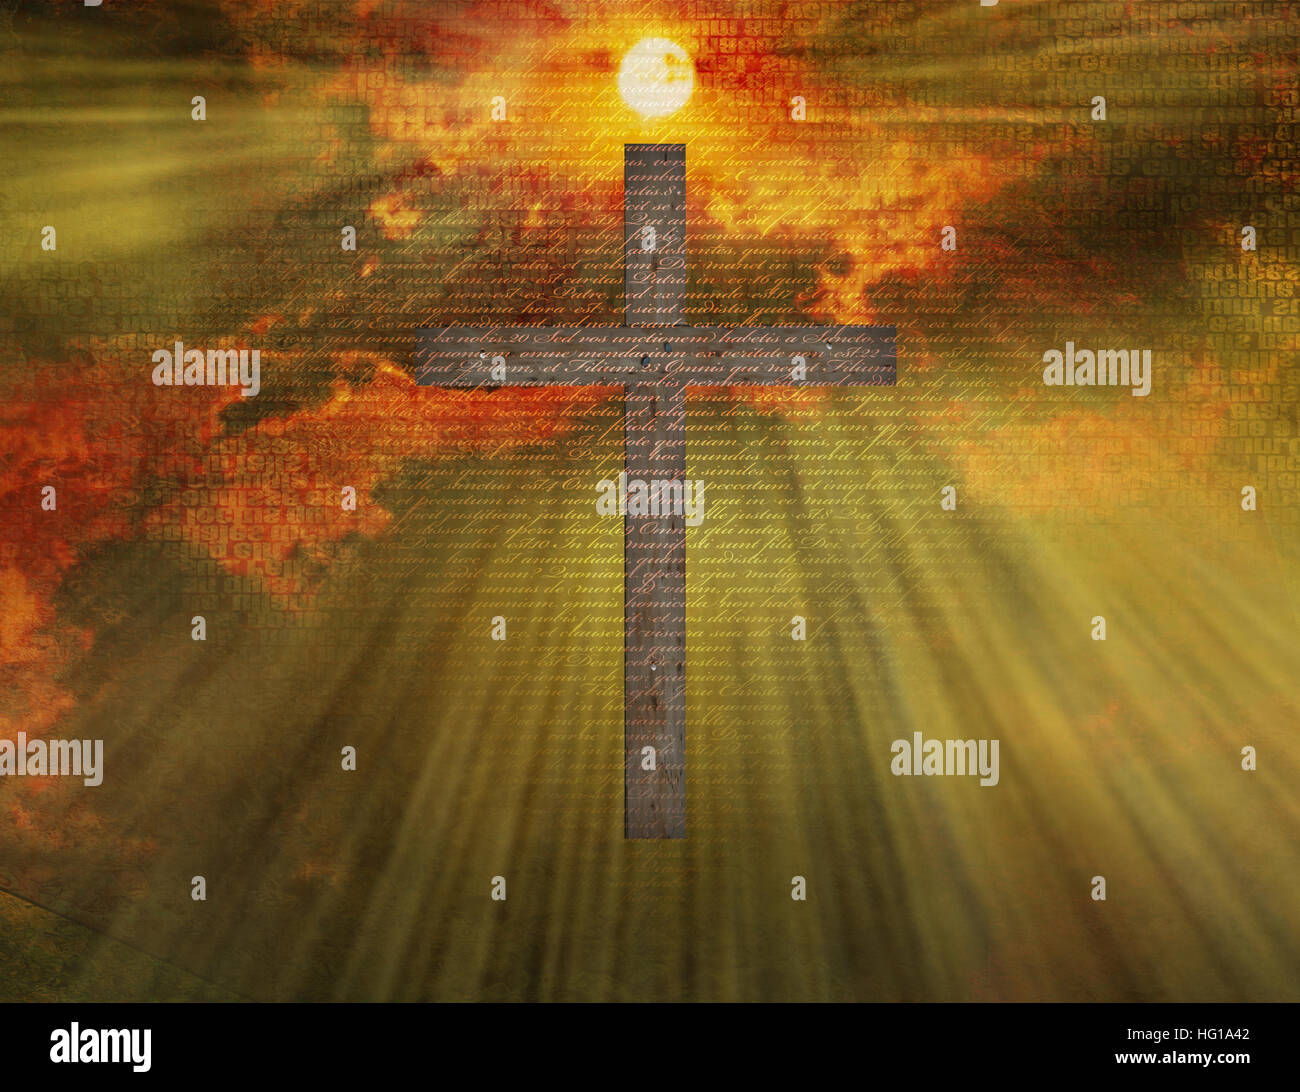 Cross hangs in air with Latin text Stock Photo